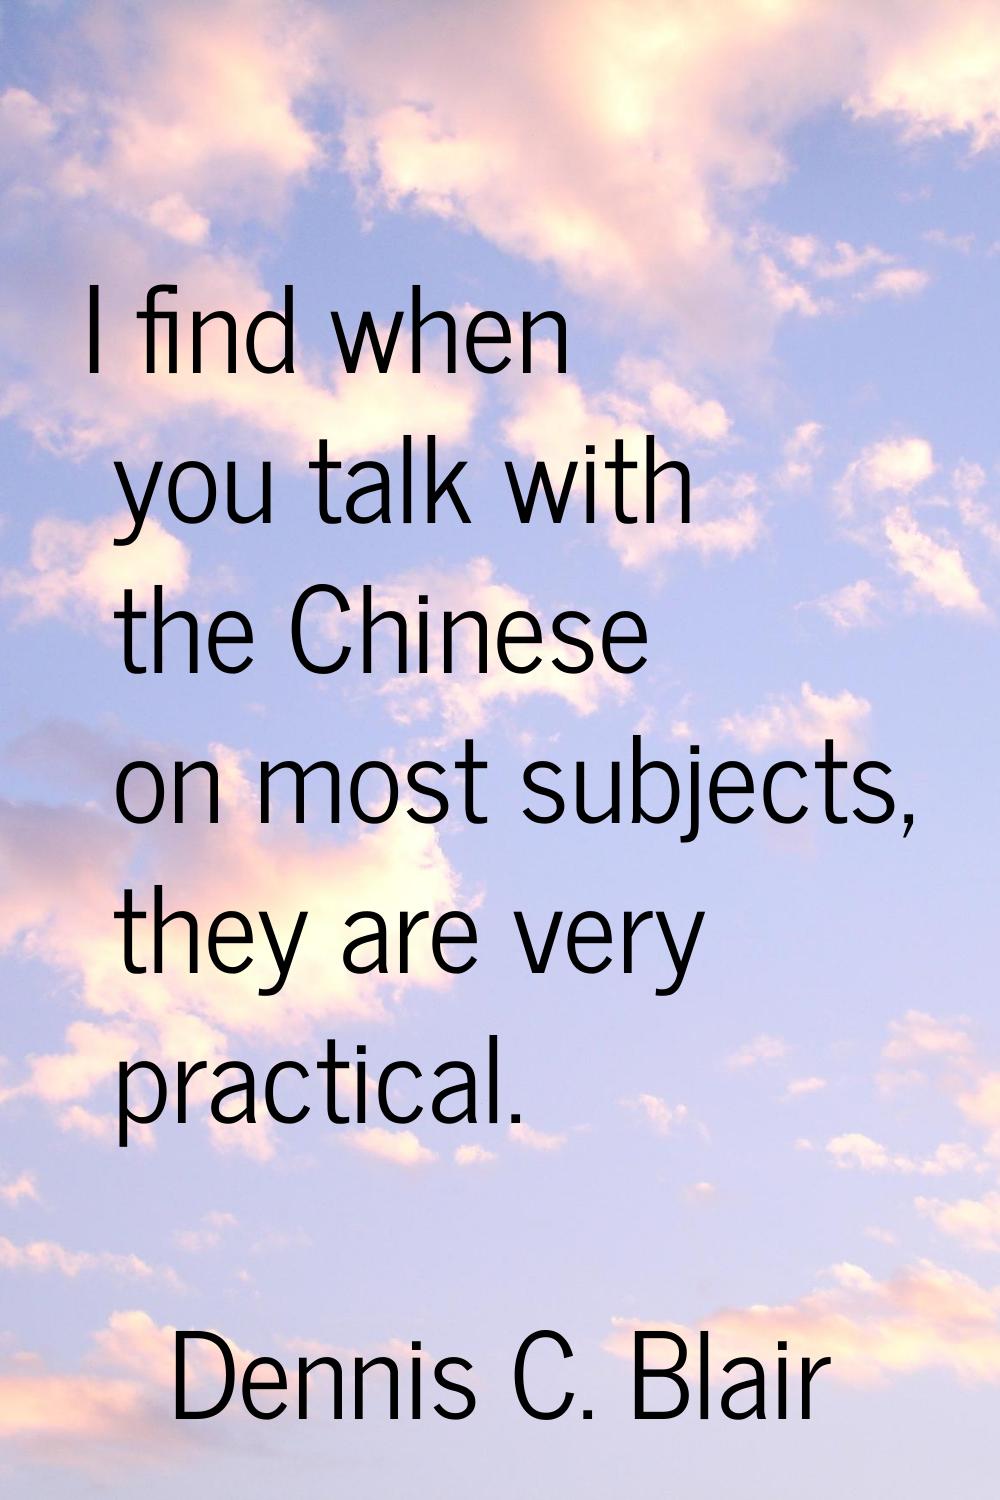 I find when you talk with the Chinese on most subjects, they are very practical.